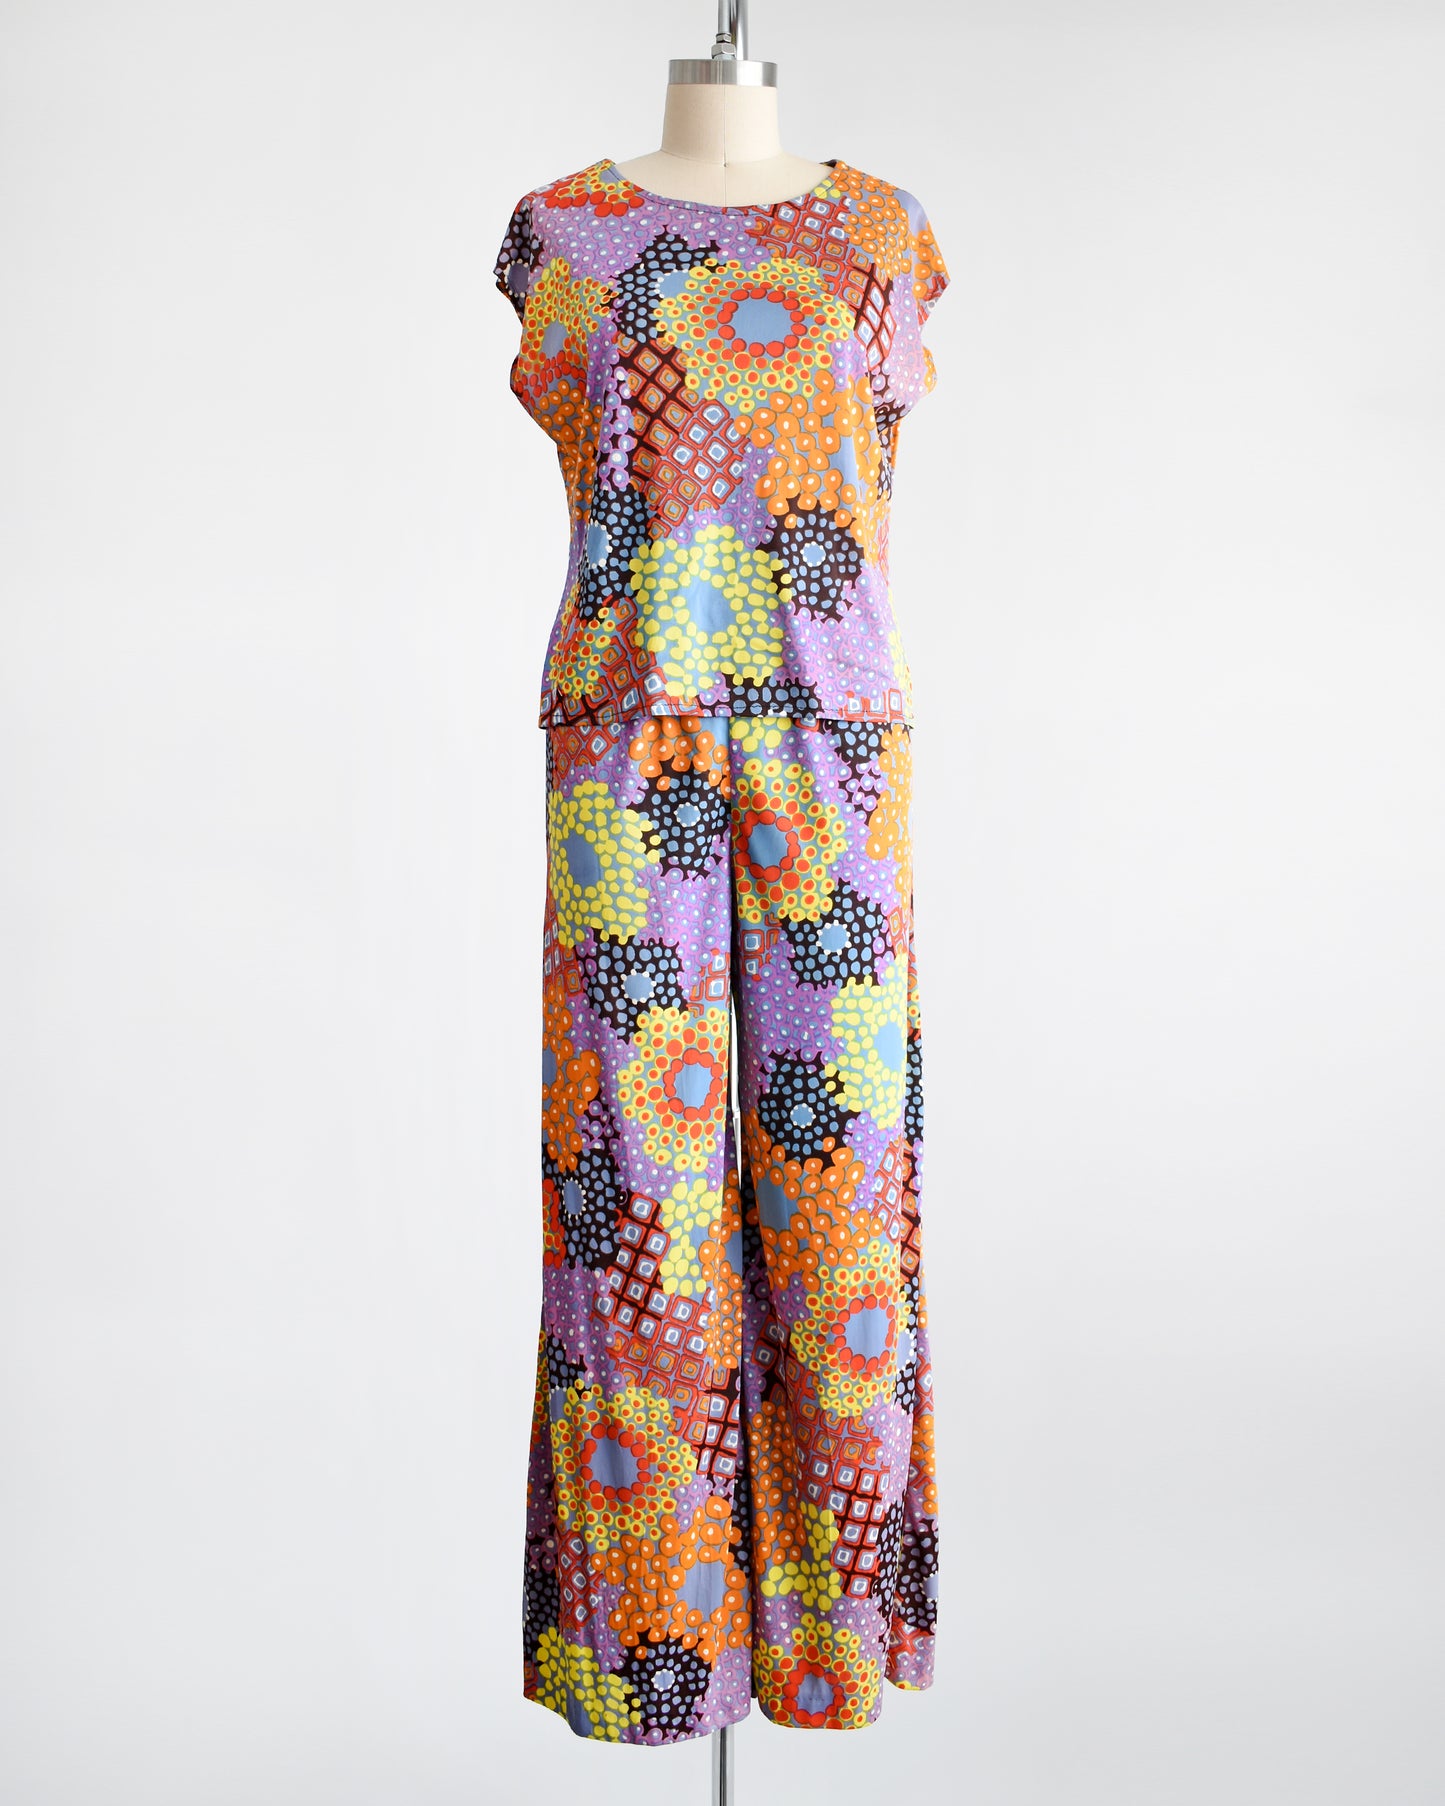 Vibrant vintage 1970 mod floral pantsuit that has a matching top and bottom